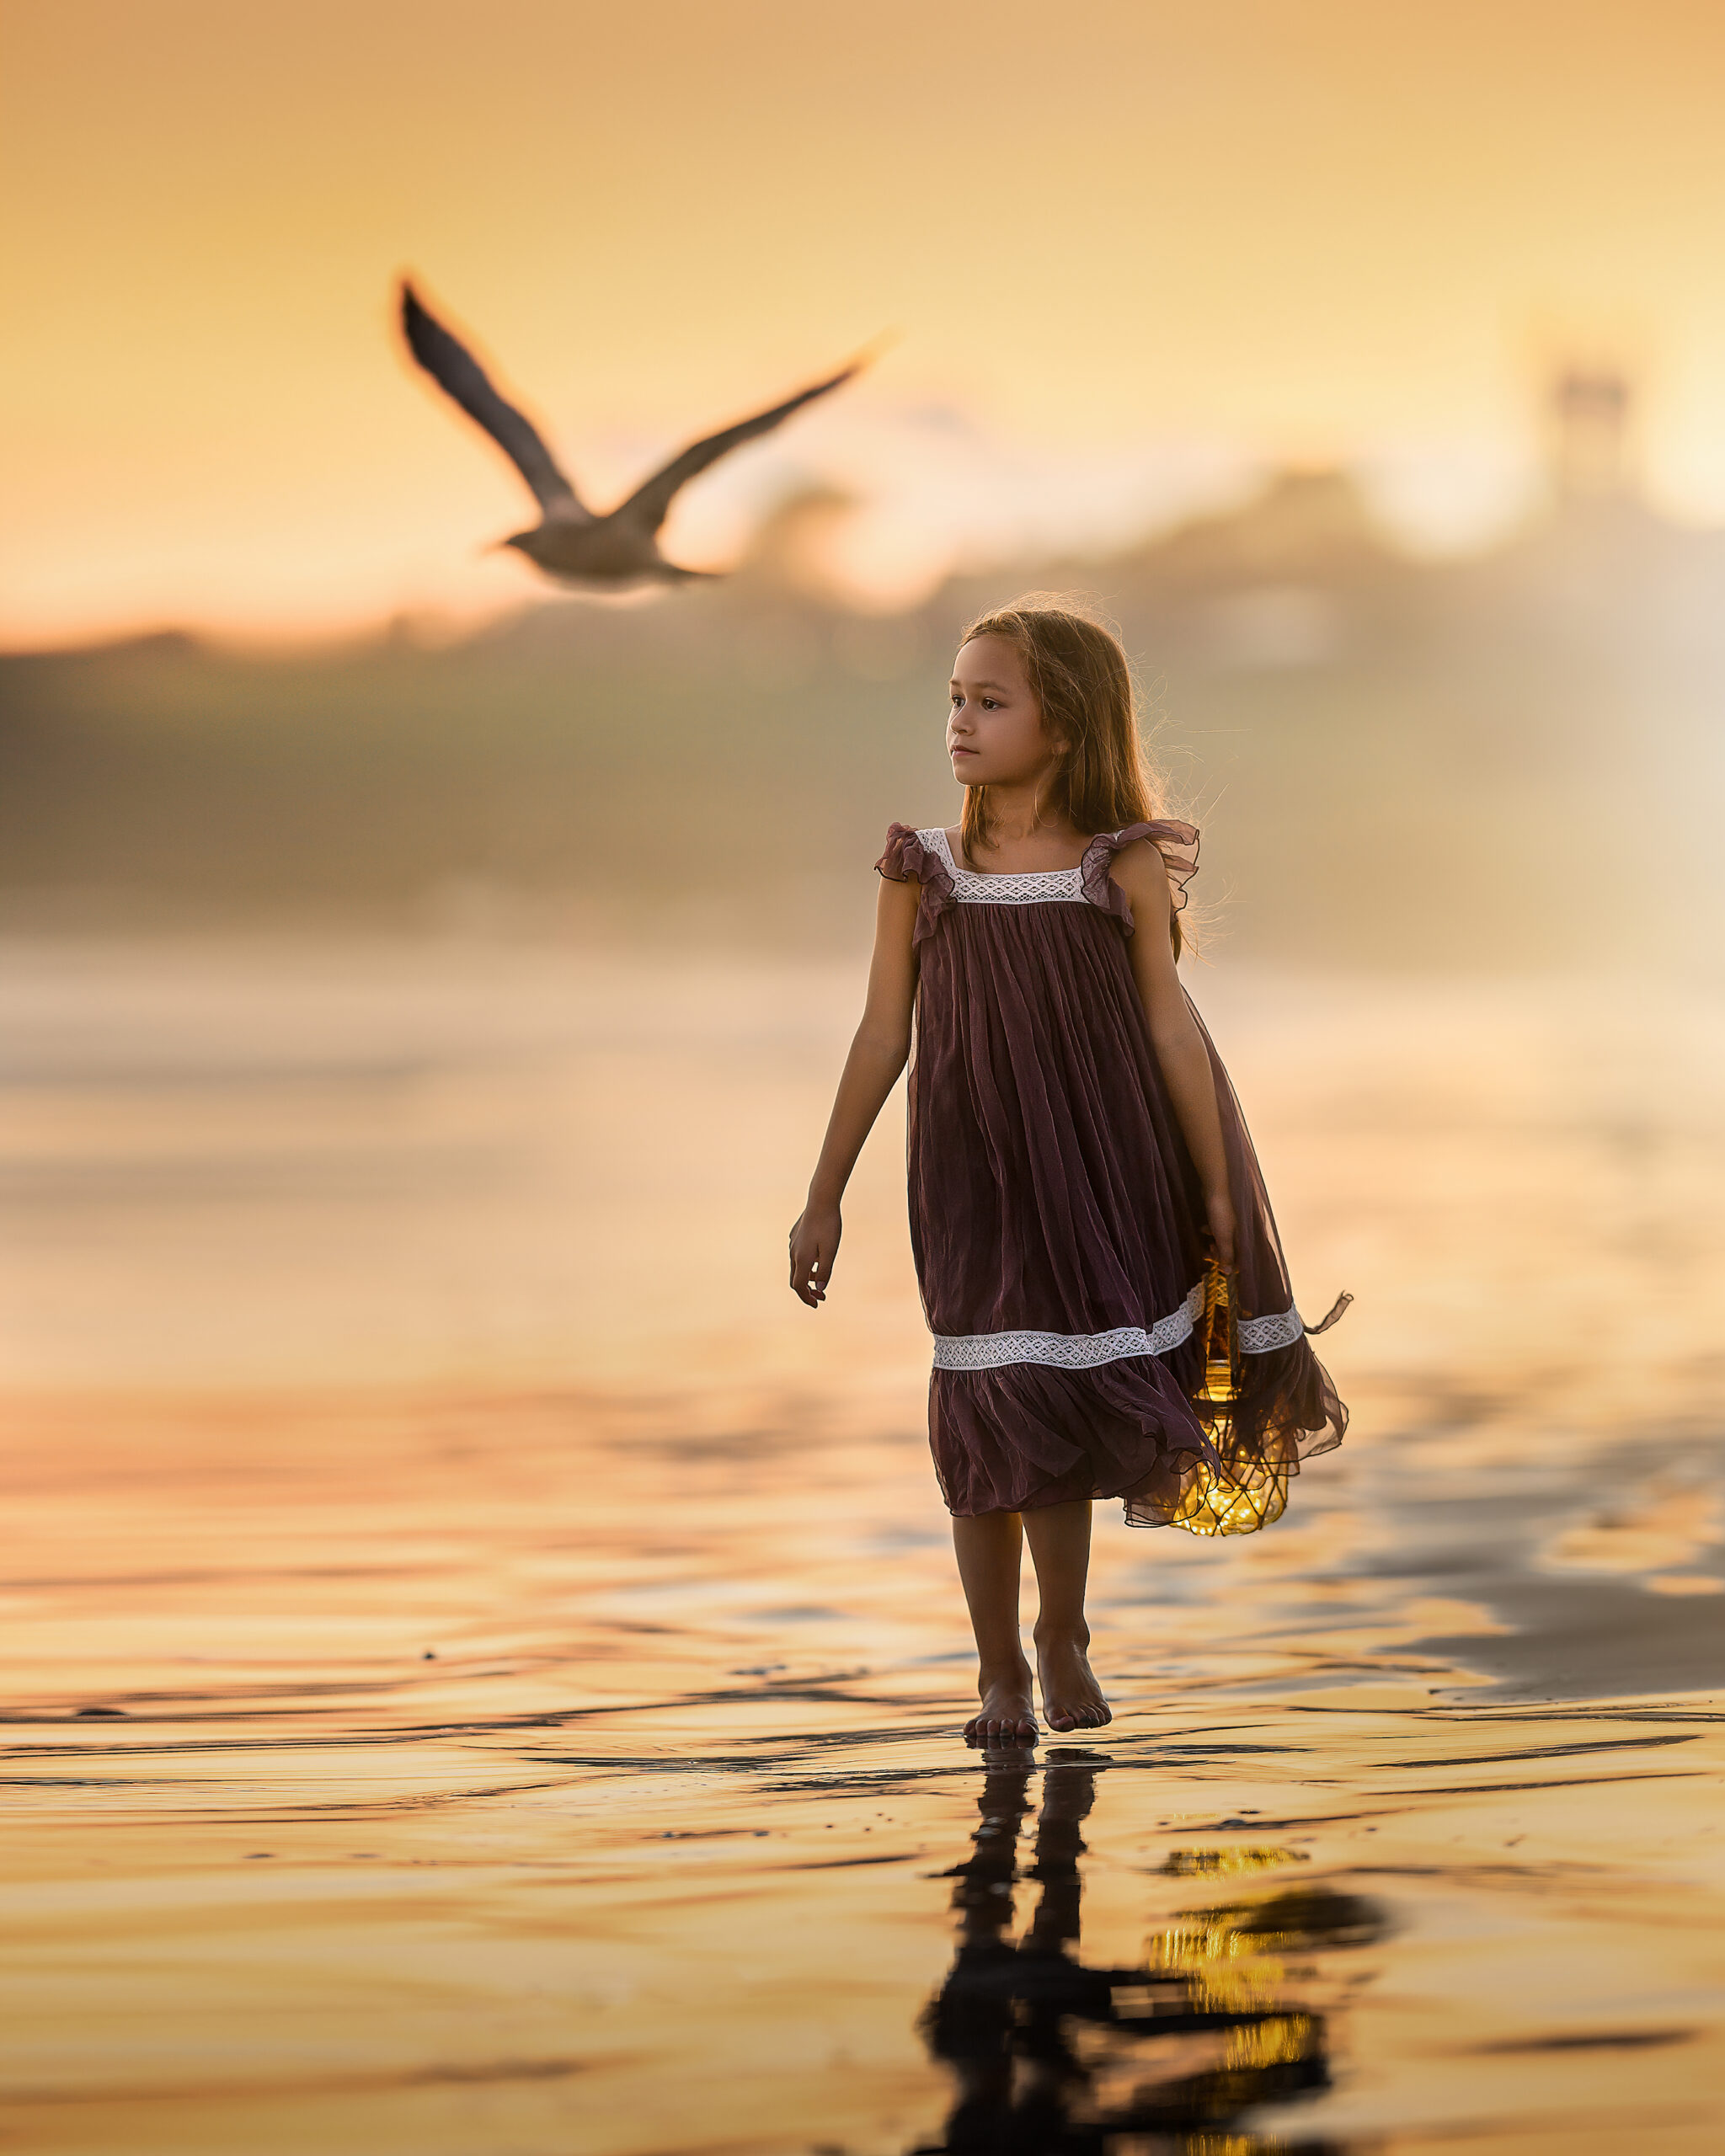 Girl walking along the beach with a seagull flying